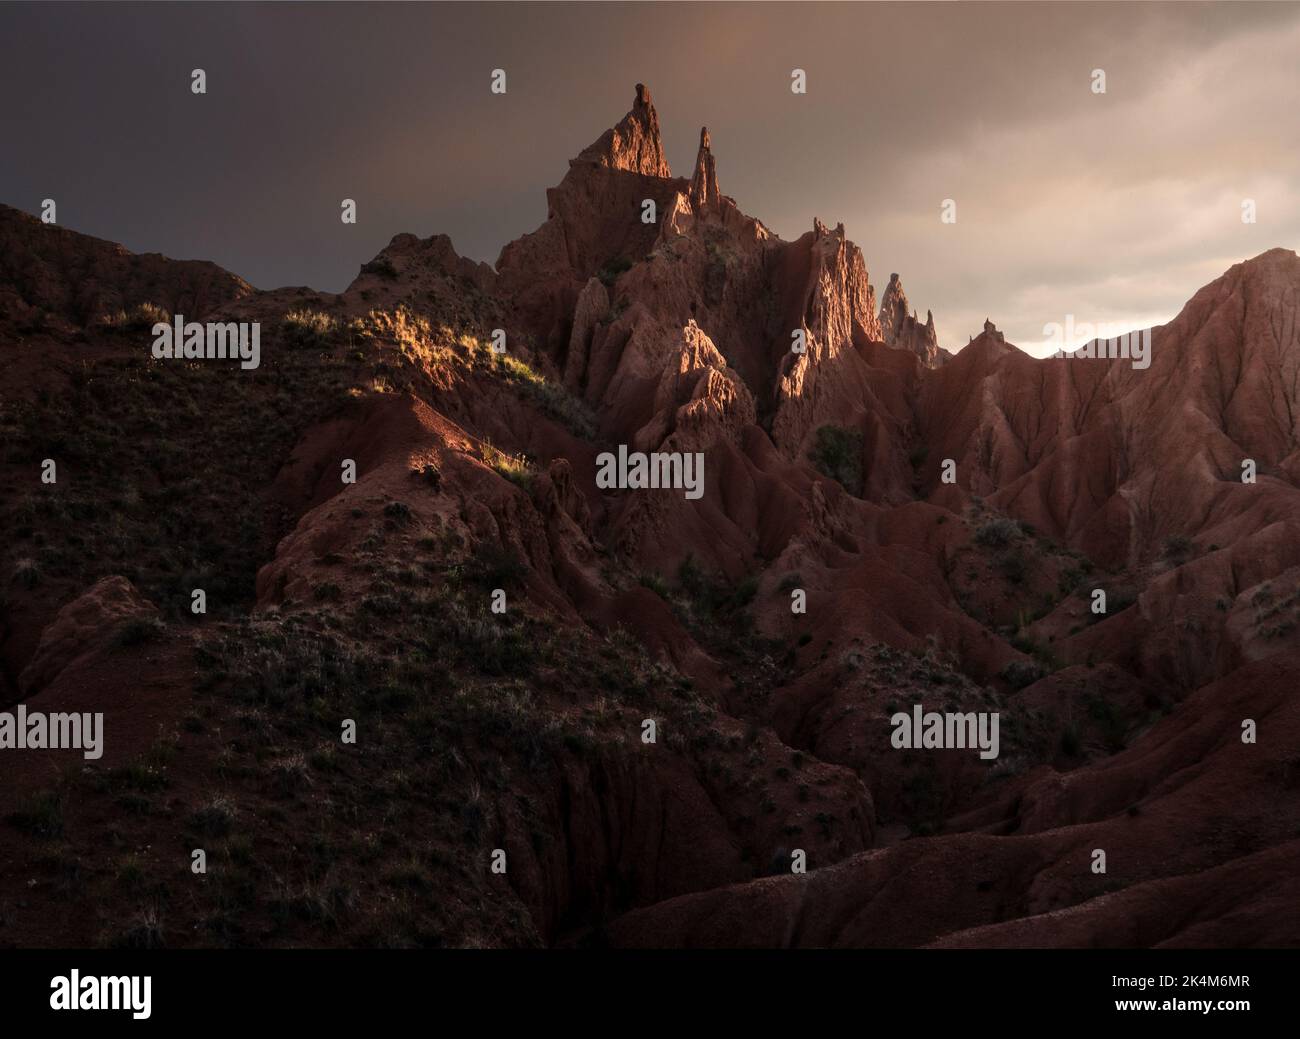 https://c8.alamy.com/comp/2K4M6MR/sharp-rock-formations-and-dramatic-sunset-at-colourful-skazka-fairytale-canyon-in-issyk-kul-region-kyrgyzstan-2K4M6MR.jpg